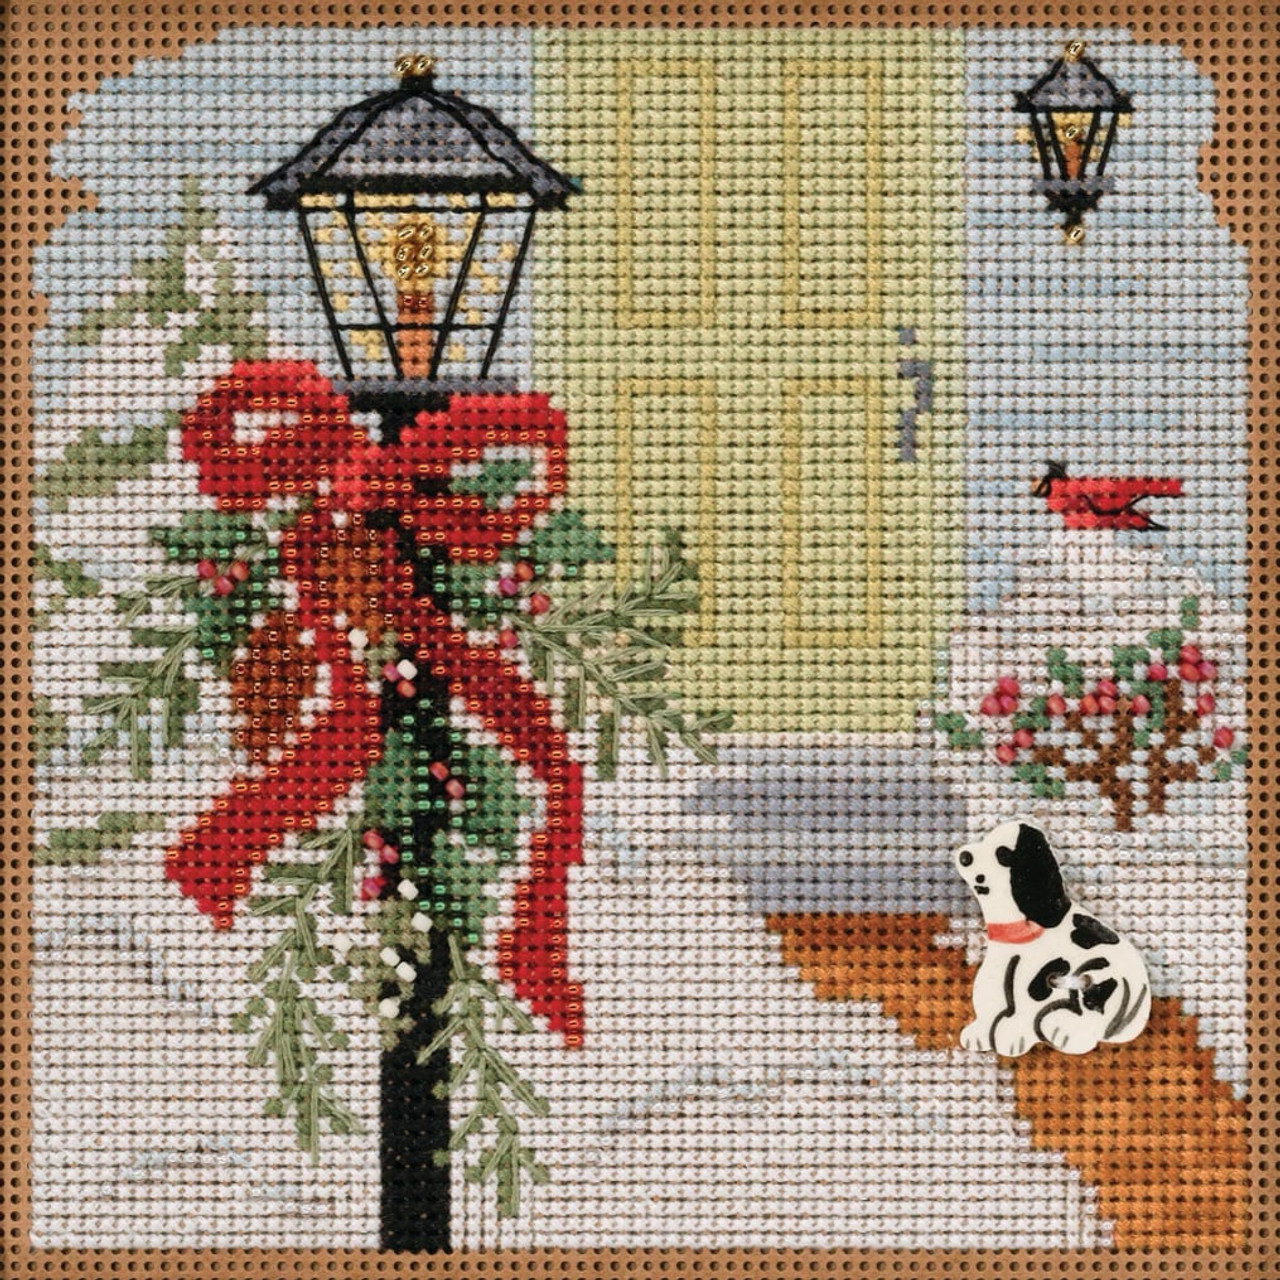 Stitched area of Christmas Welcome Cross Stitch Kit Mill Hill 2020 Buttons Beads Winter MH142031